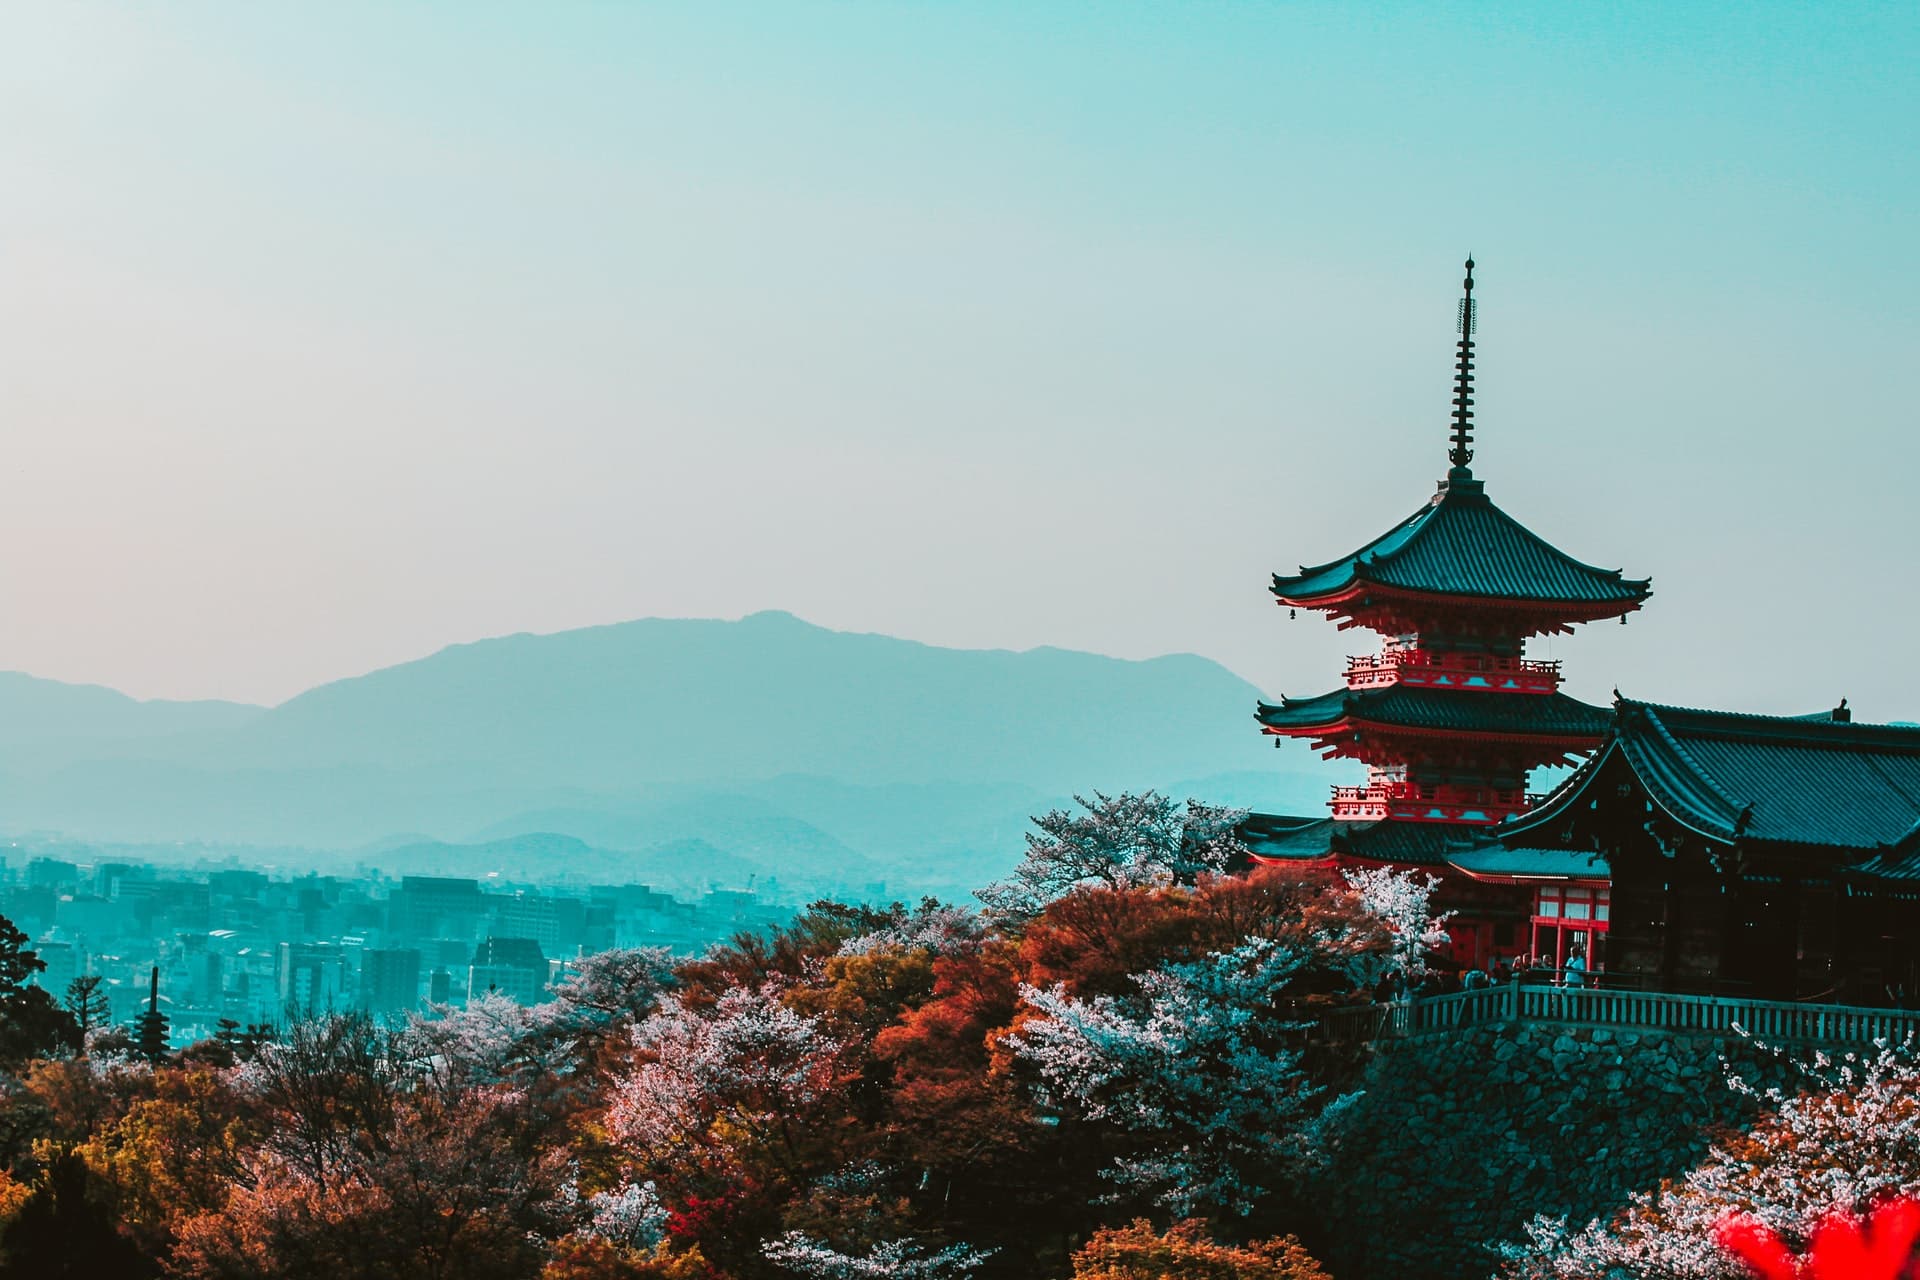 If you want to move to Japan, it's time to look for A 2022 Quick Guide To Japan's Internet Service Providers.